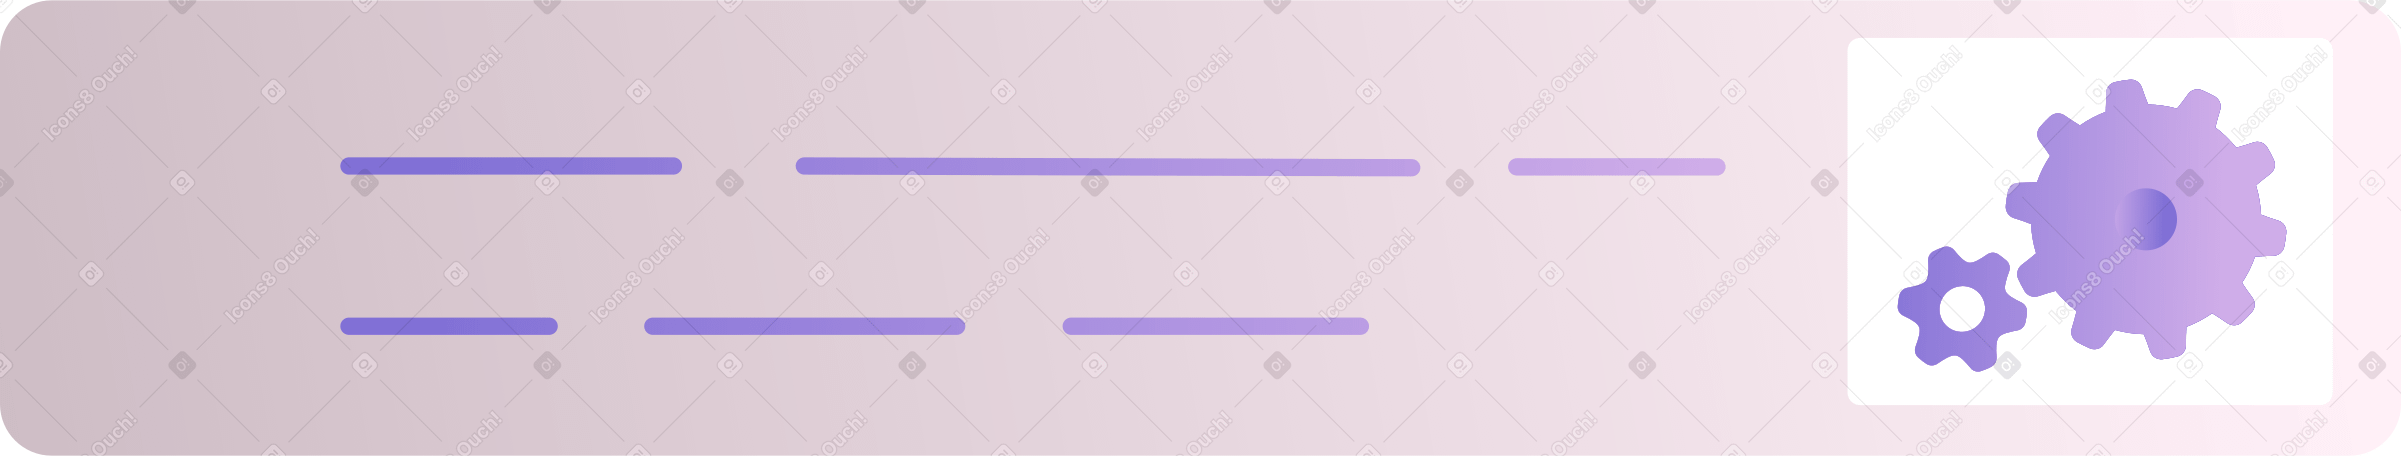 settings window Illustration in PNG, SVG